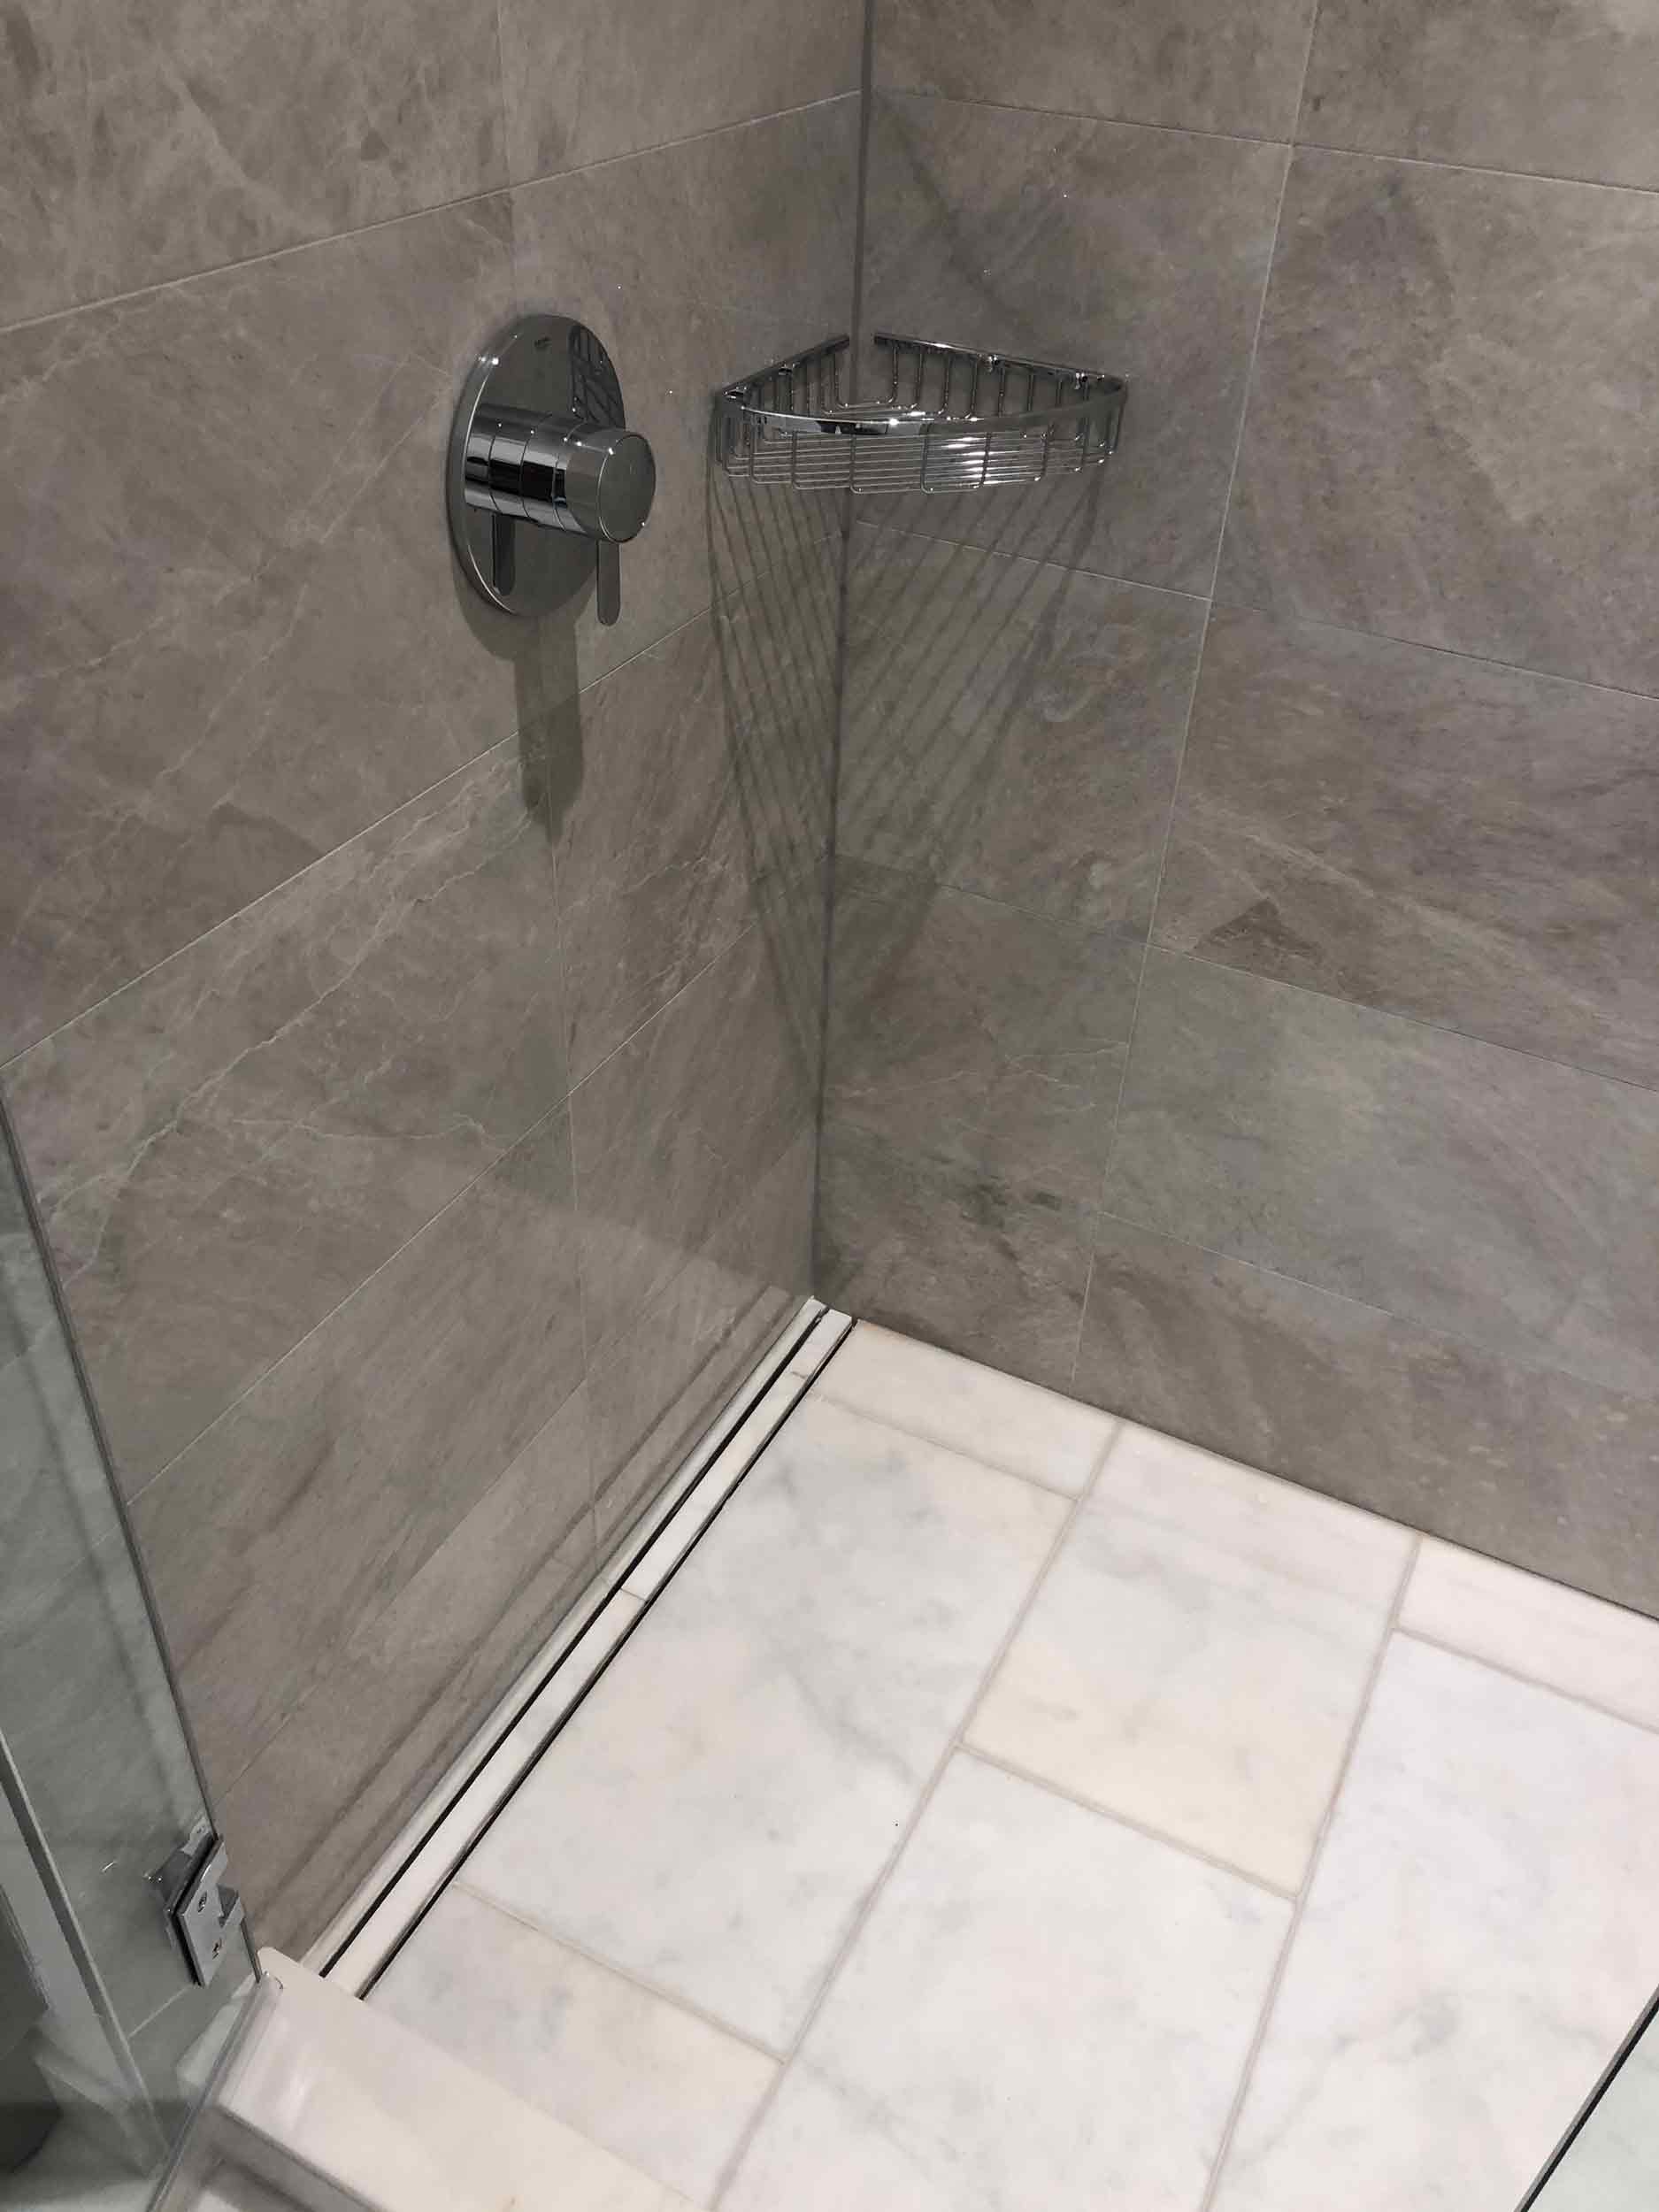 A QuickDrain Tile In shower system in a tiled shower